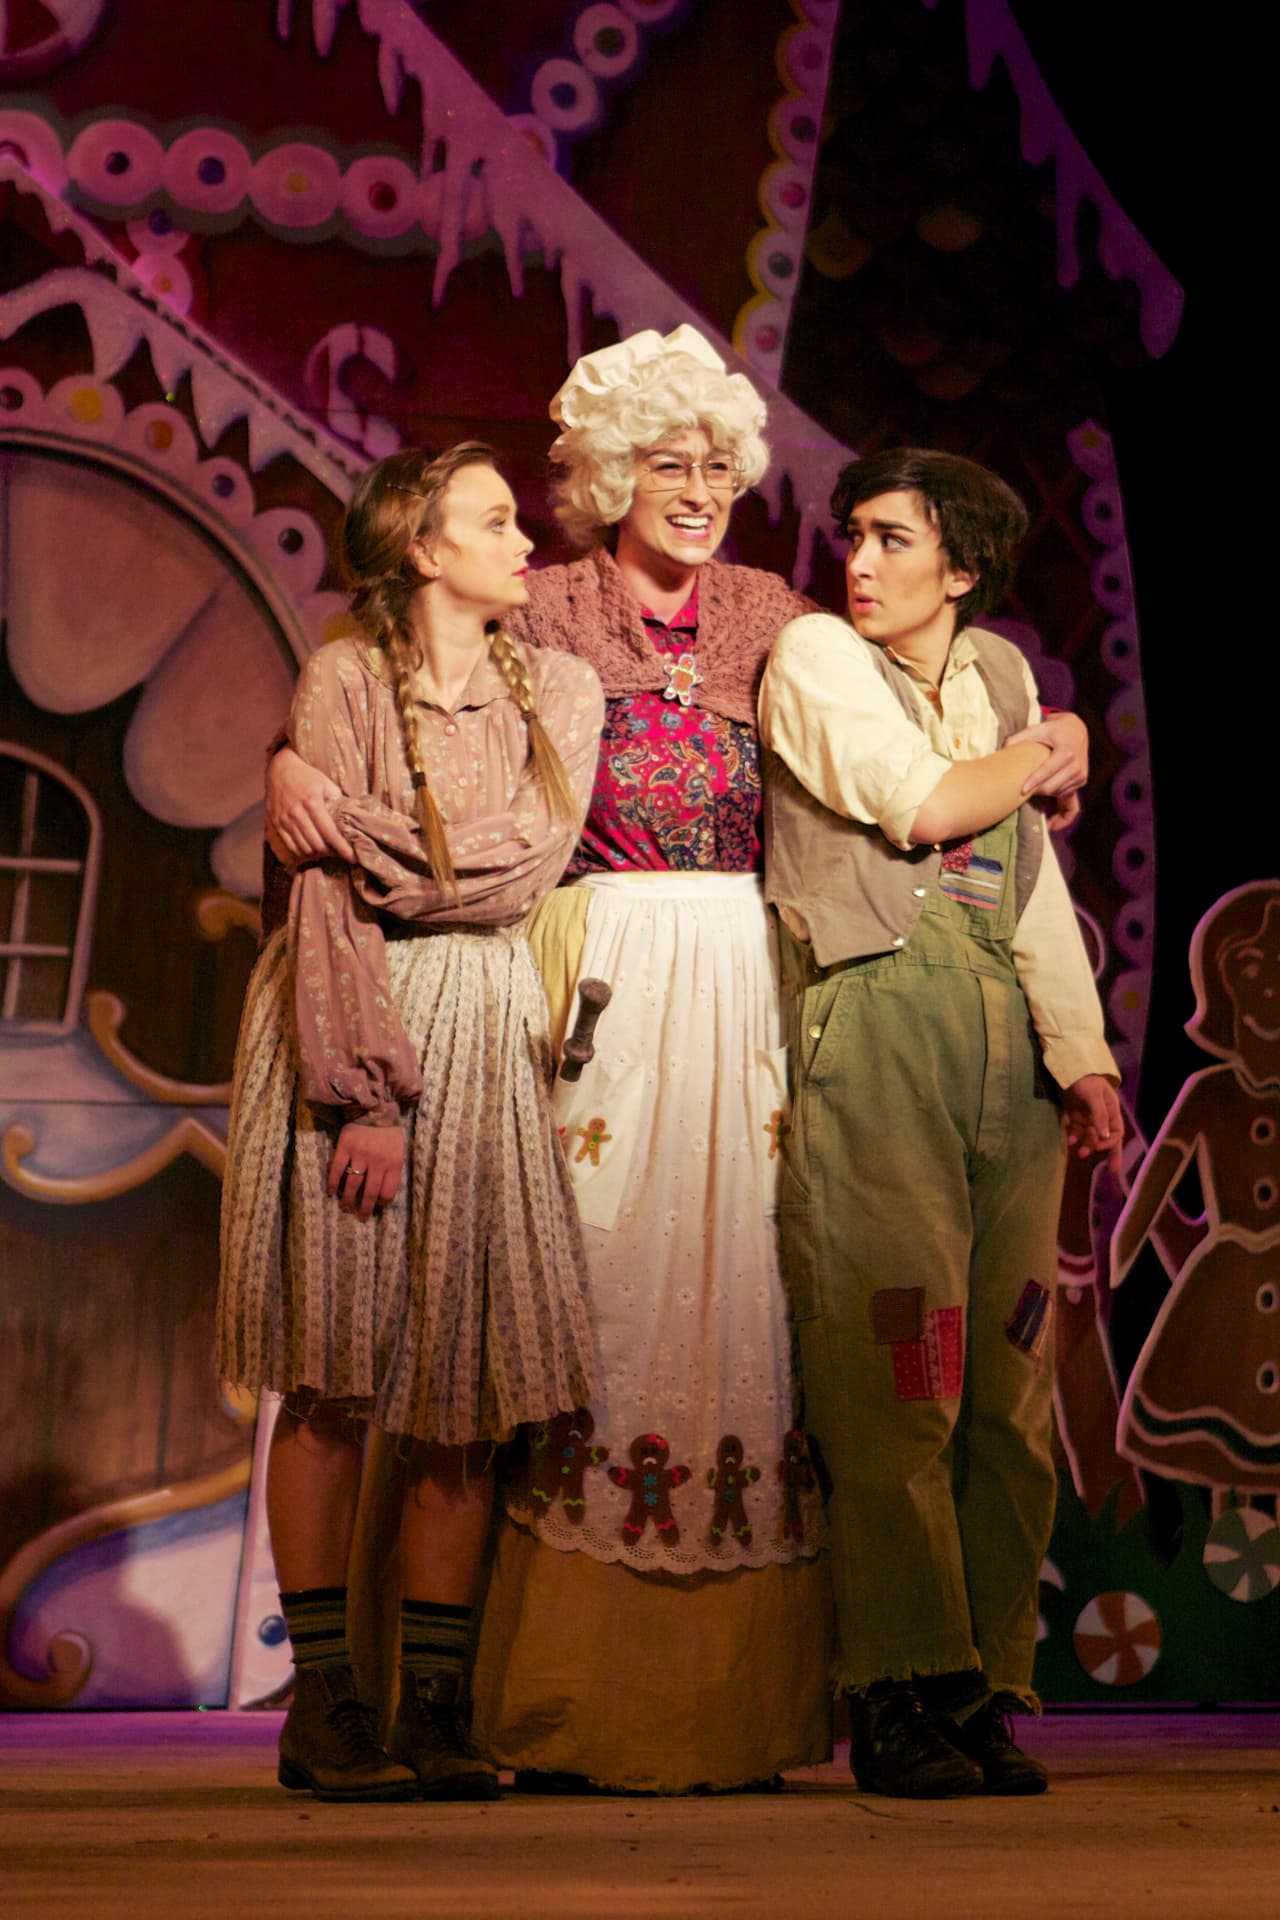 The Purchase Opera is ready to present "Hansel and Gretel" starting Nov. 15. 